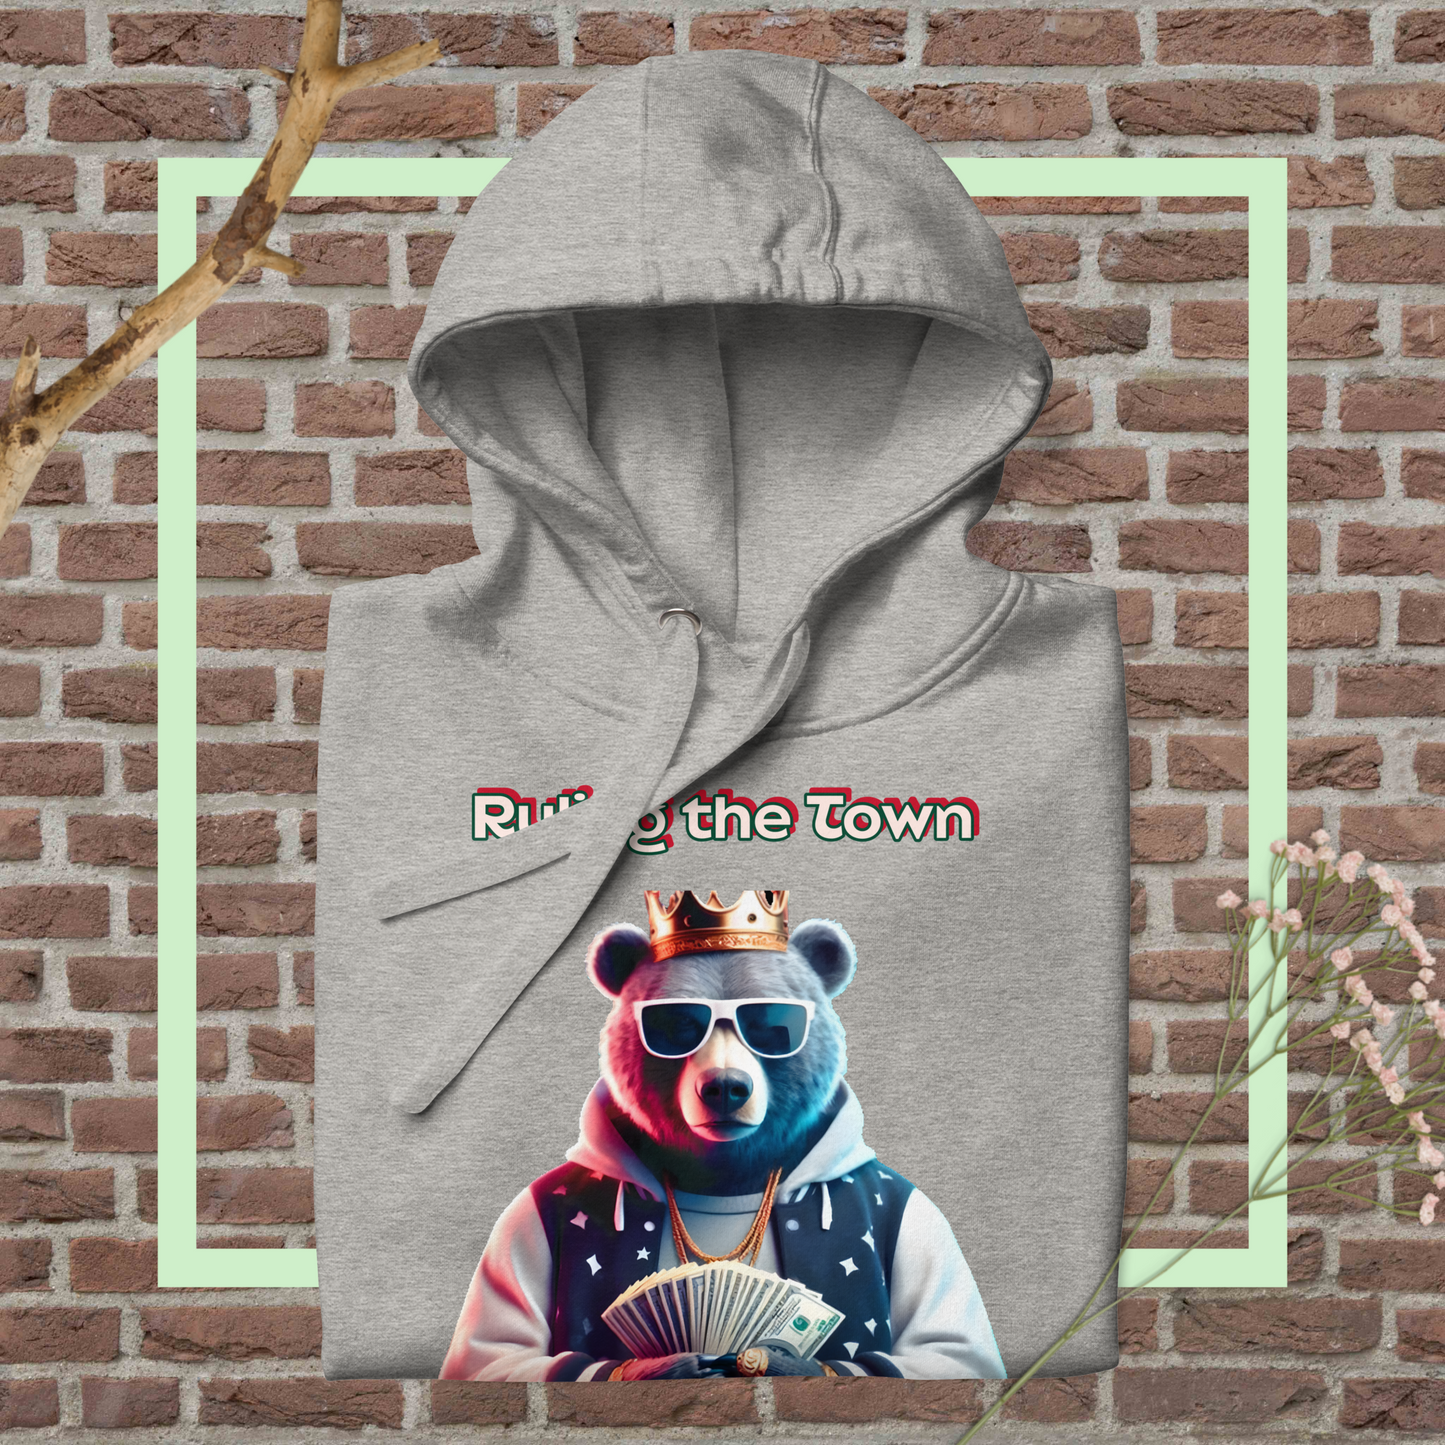 💕The Bear with Cash🐻💵 and a Crown Ruling the Town👑 Unisex Hoodie🧥